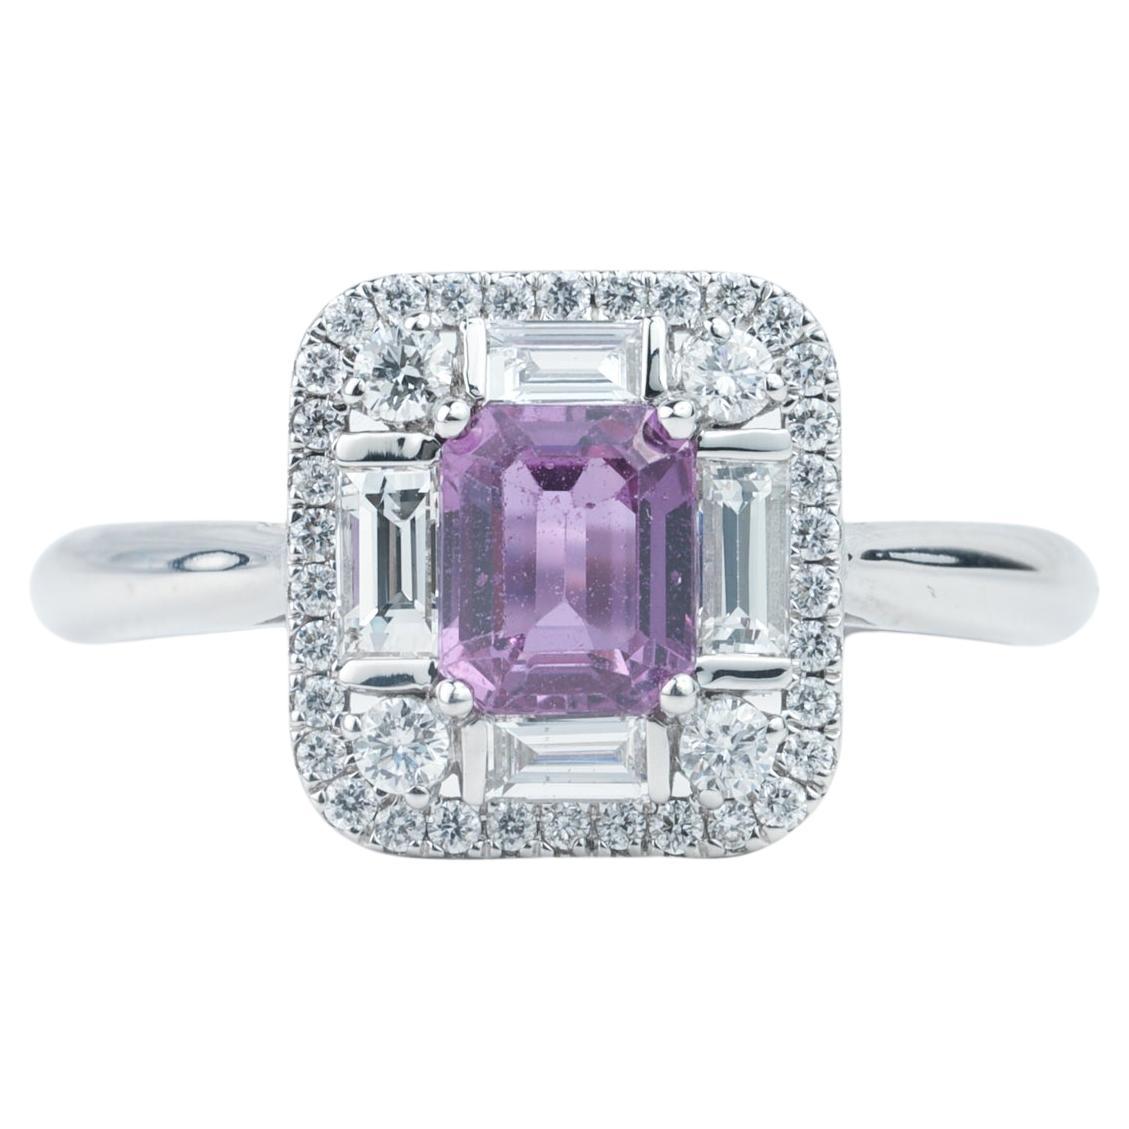 1 Carat Pink Sapphire Diamond Cocktail Engagement Ring in 18k White Gold For Sale